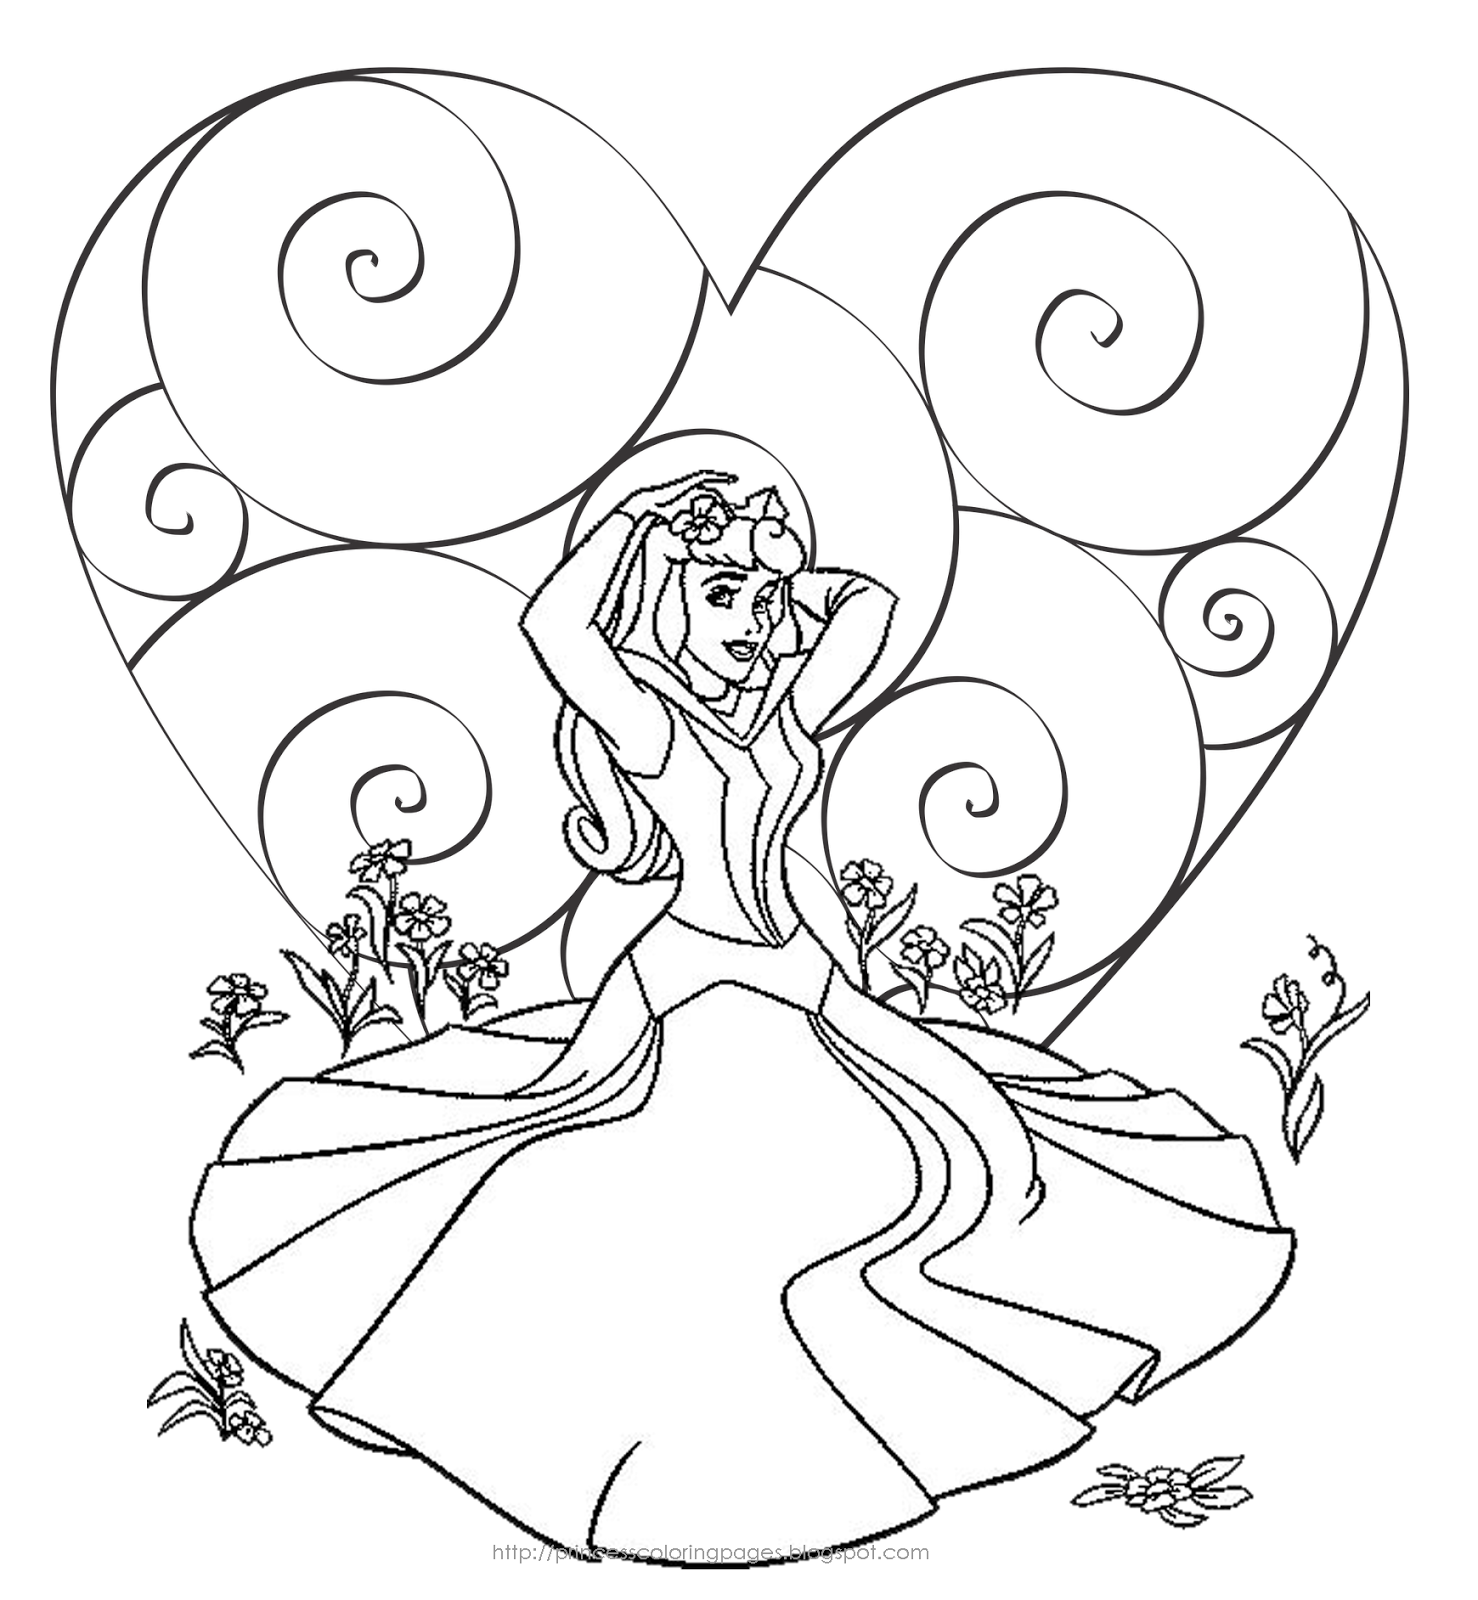 coloring pages of princesses princess riding horse coloring page free printable coloring pages princesses of 